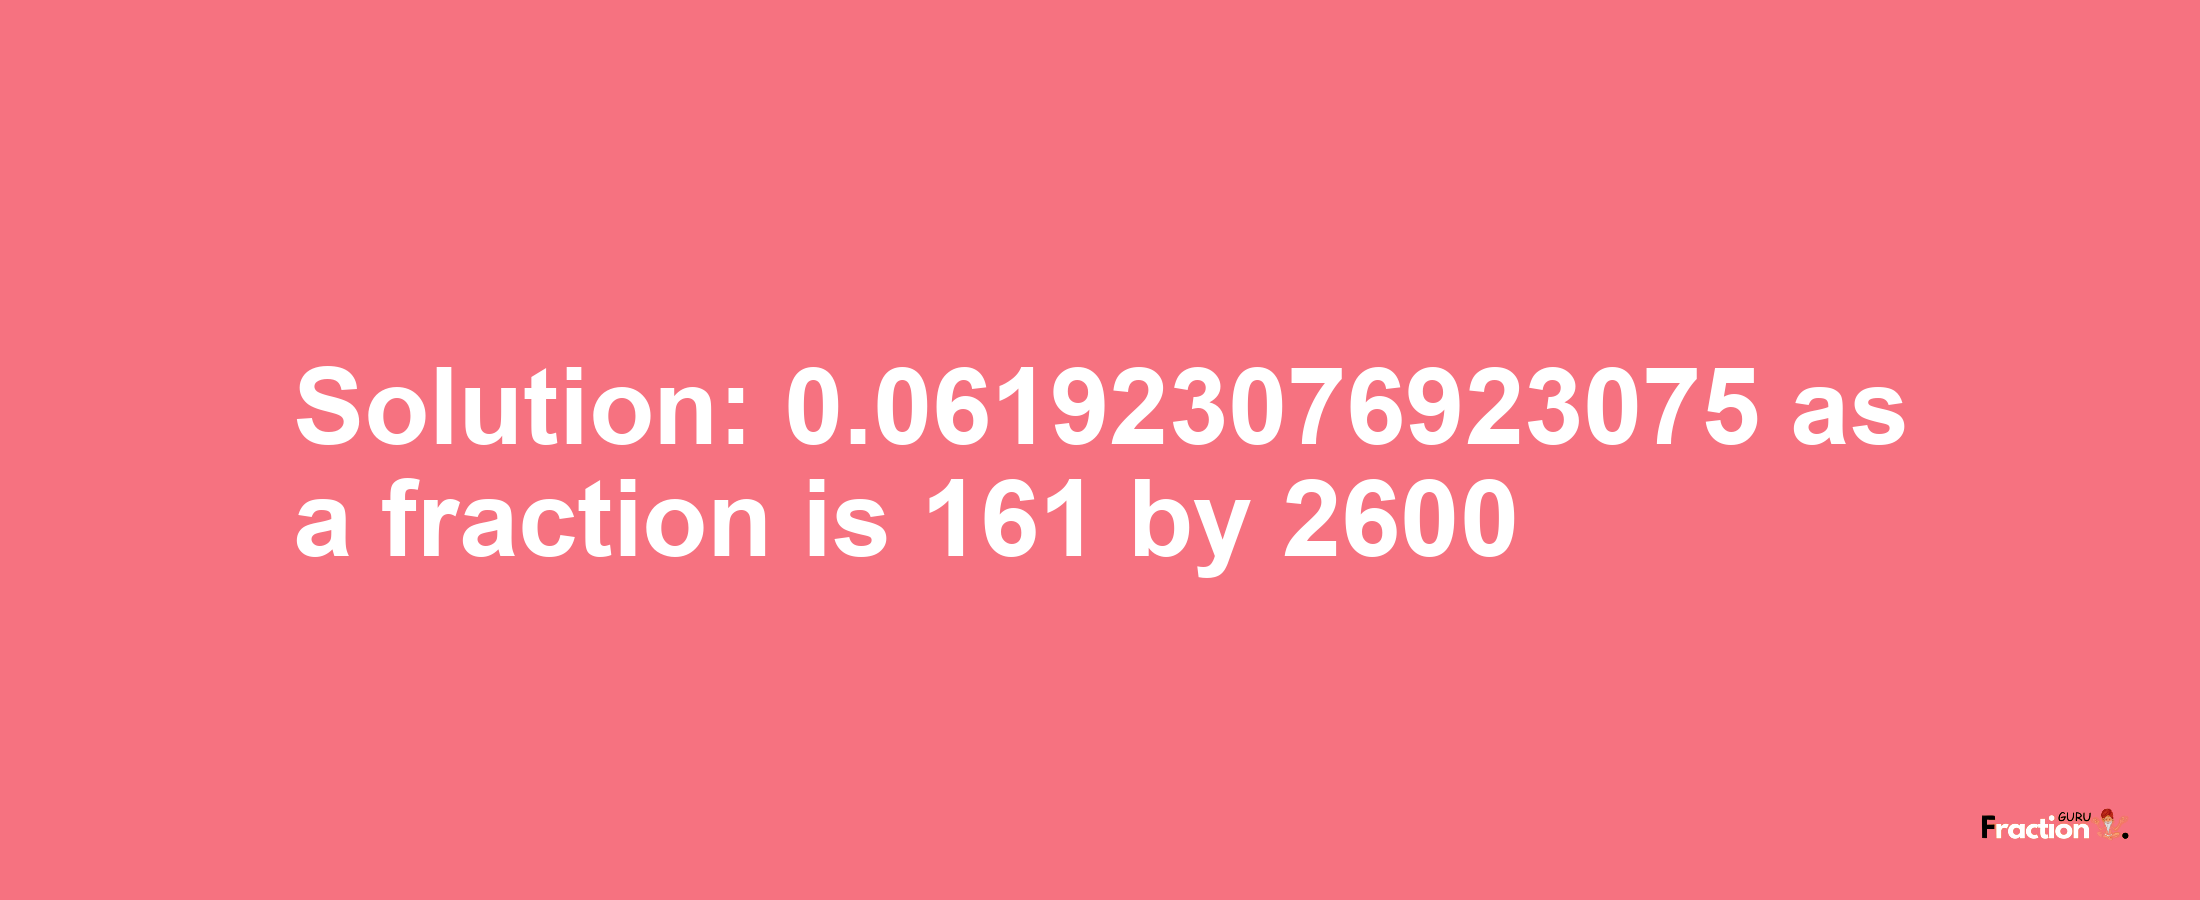 Solution:0.061923076923075 as a fraction is 161/2600